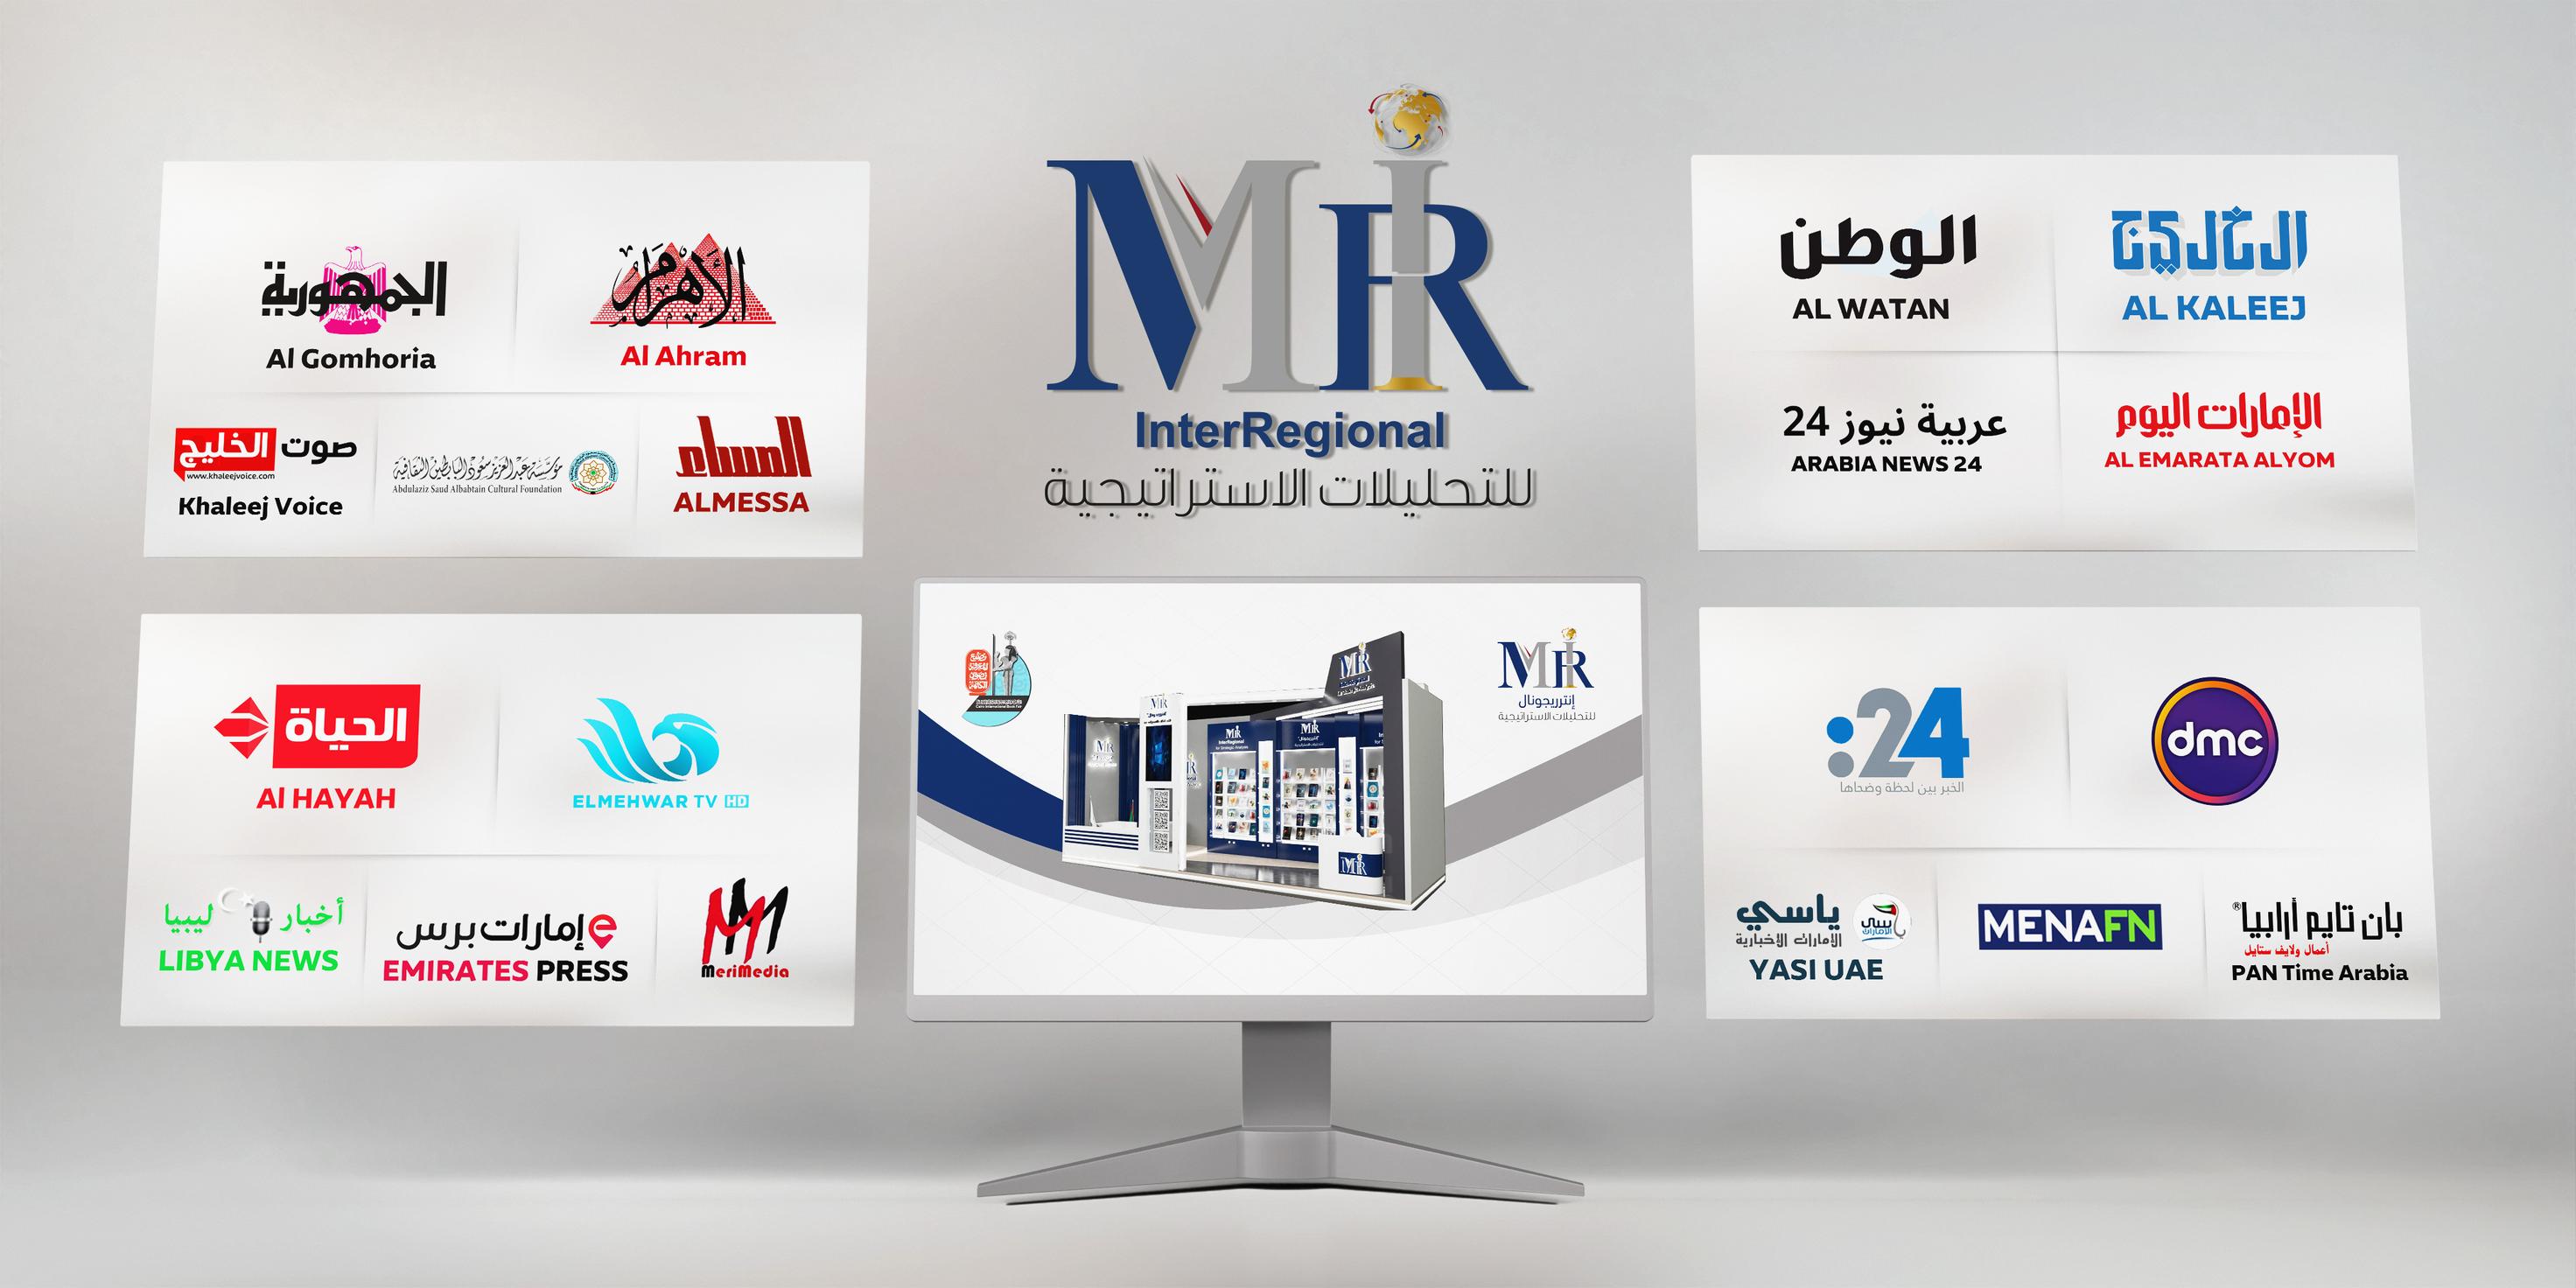 Newspaper and TV Coverage of InterRegional at the Cairo International Book Fair